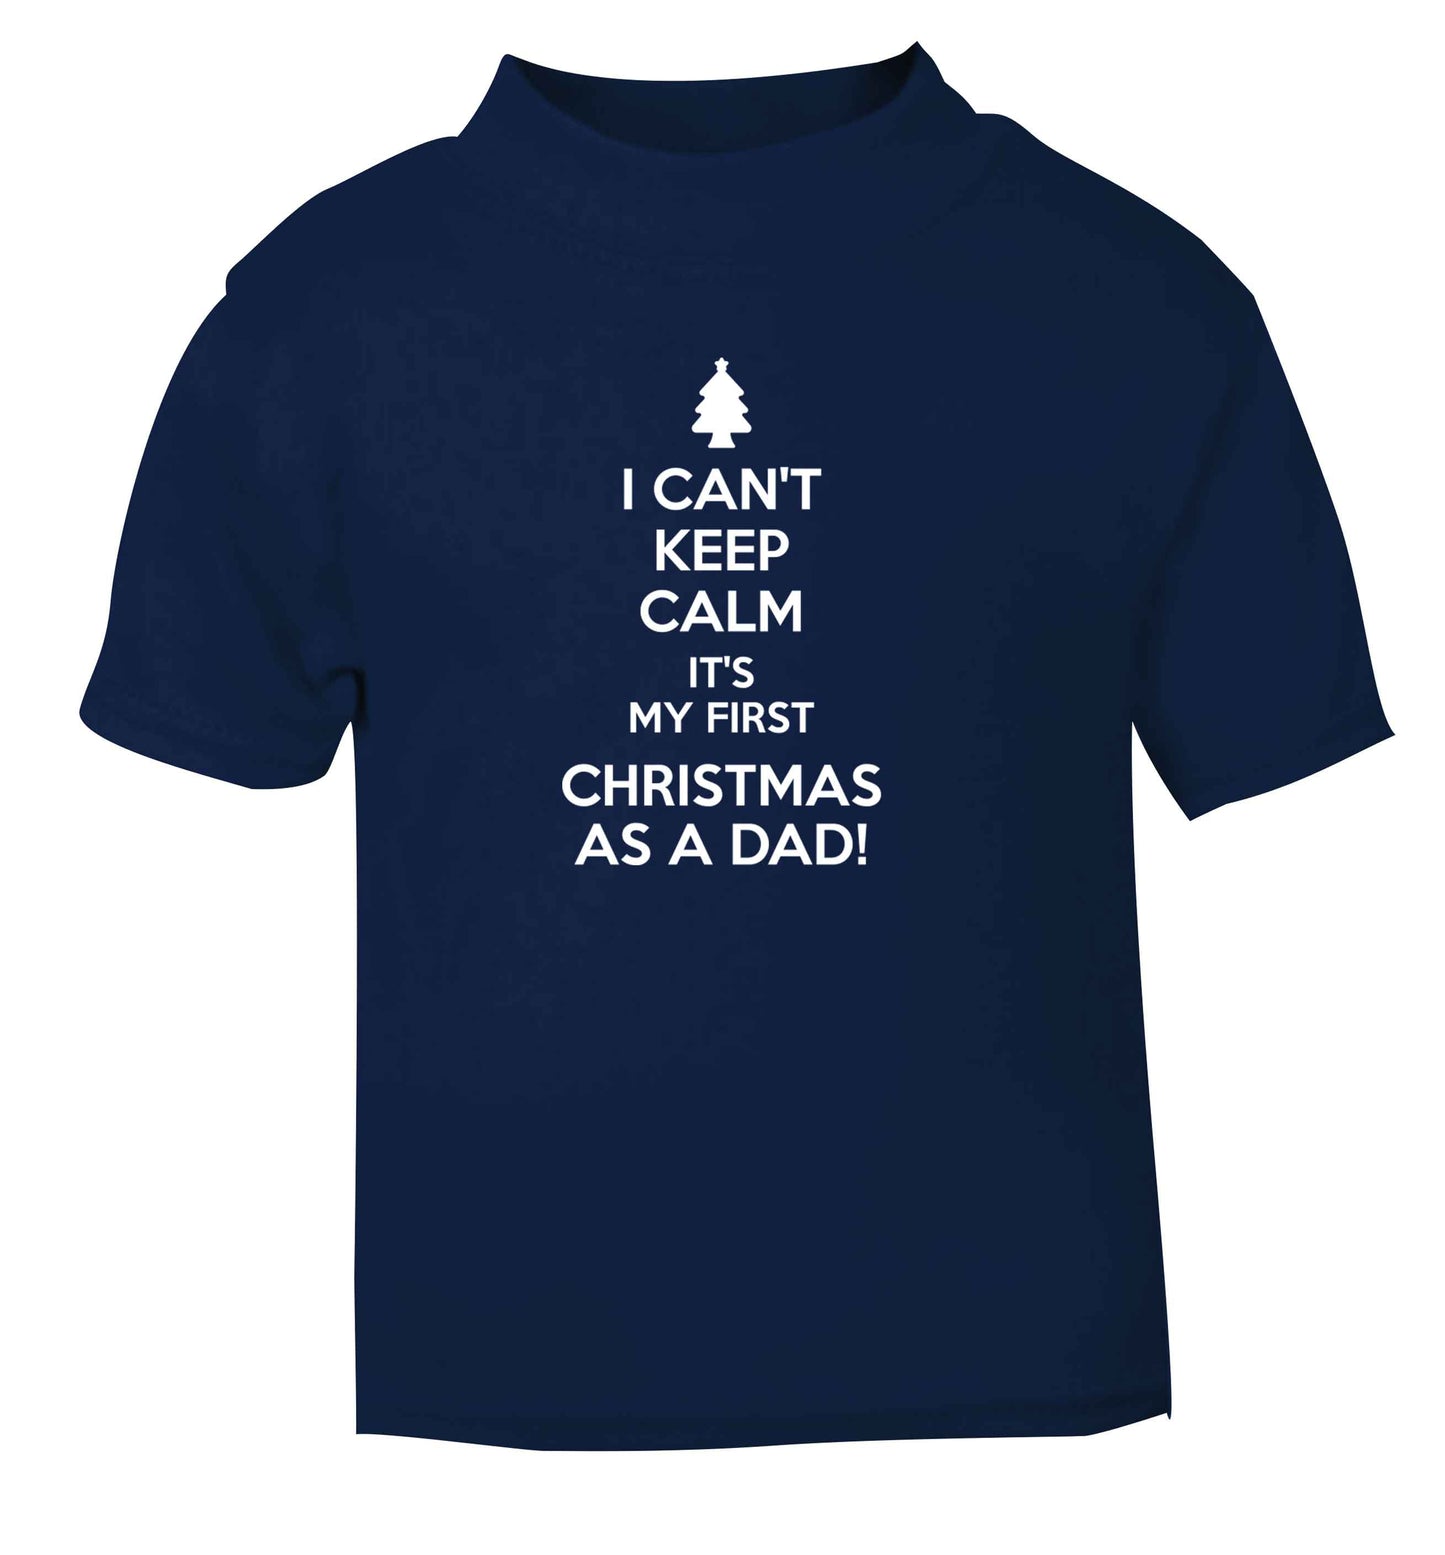 I can't keep calm it's my first Christmas as a dad navy Baby Toddler Tshirt 2 Years